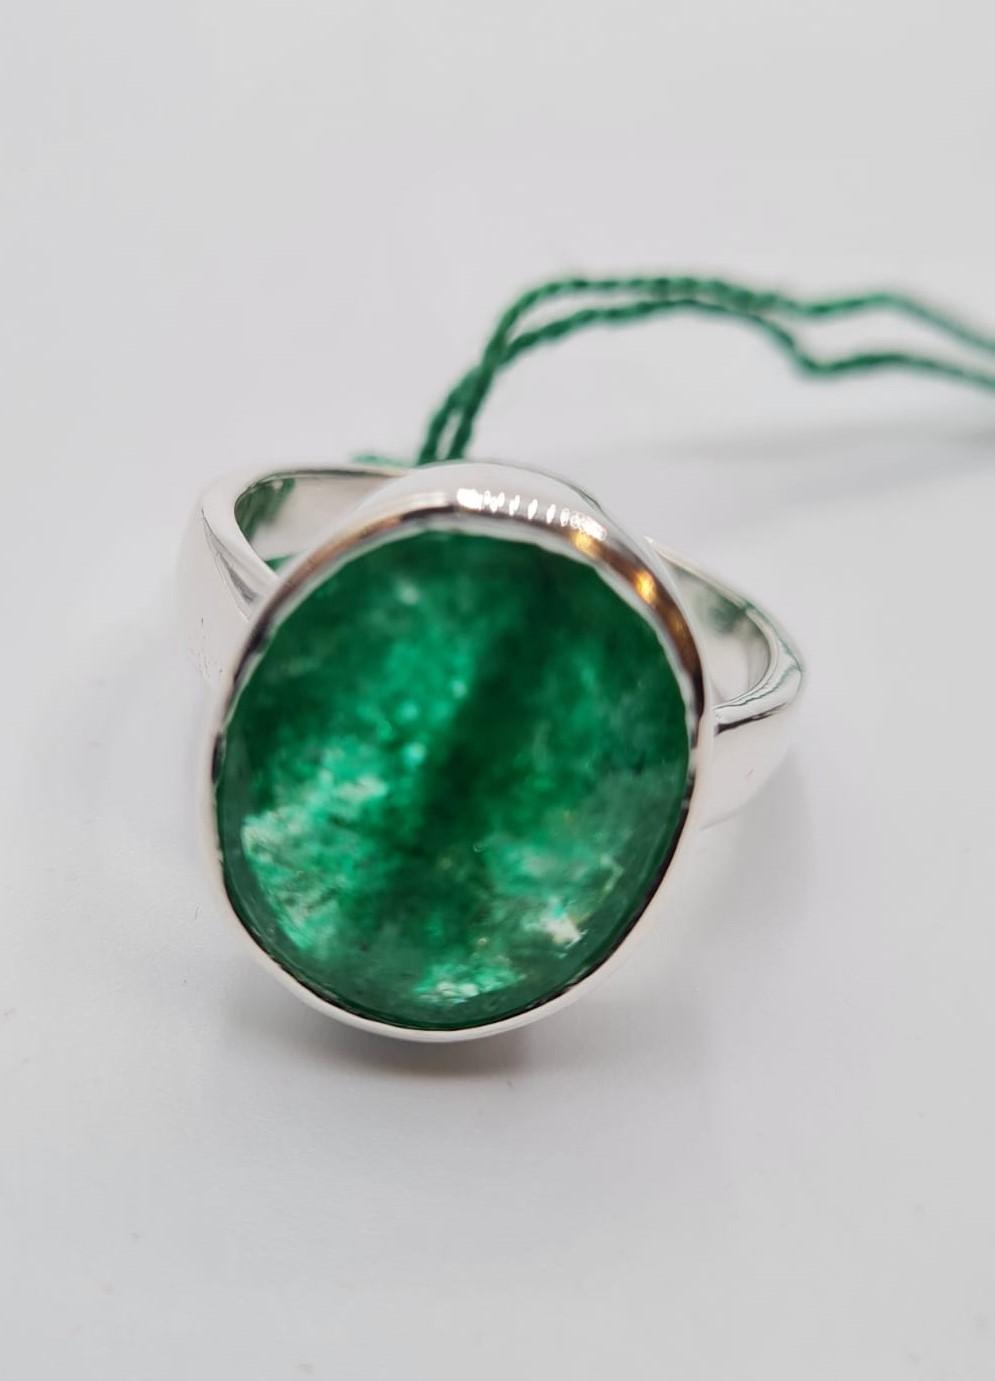 12.66ct emerald stone ring in 925 silver